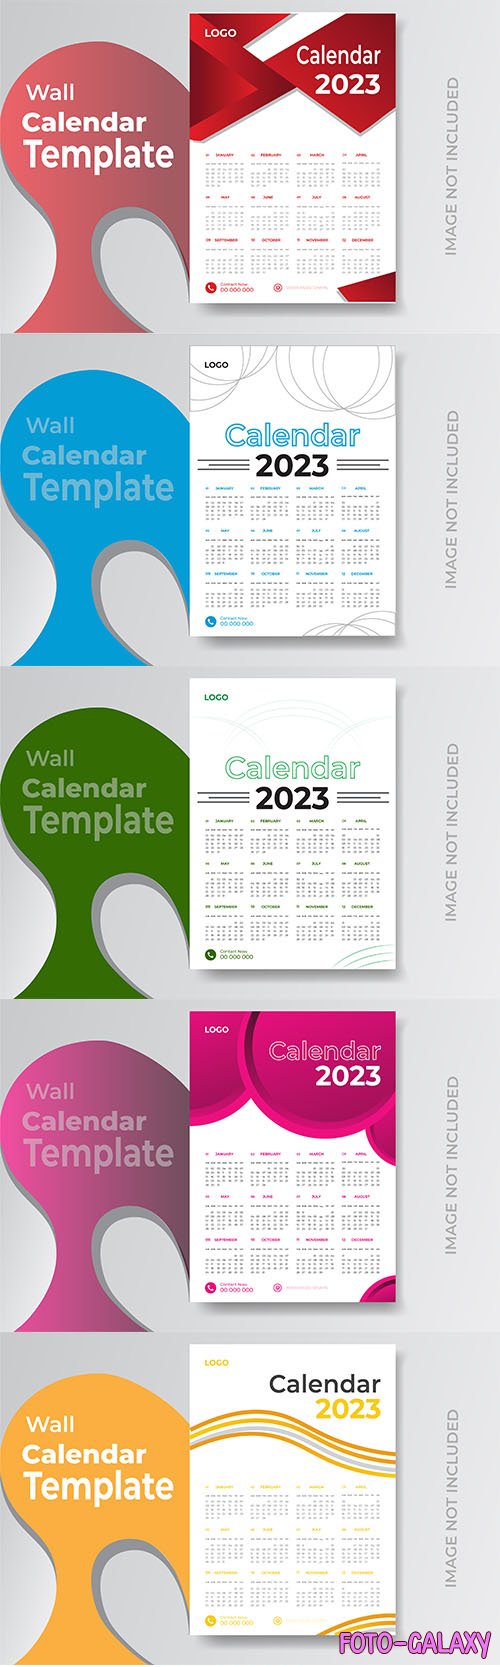 2023 calendar colorful design template for happy new year